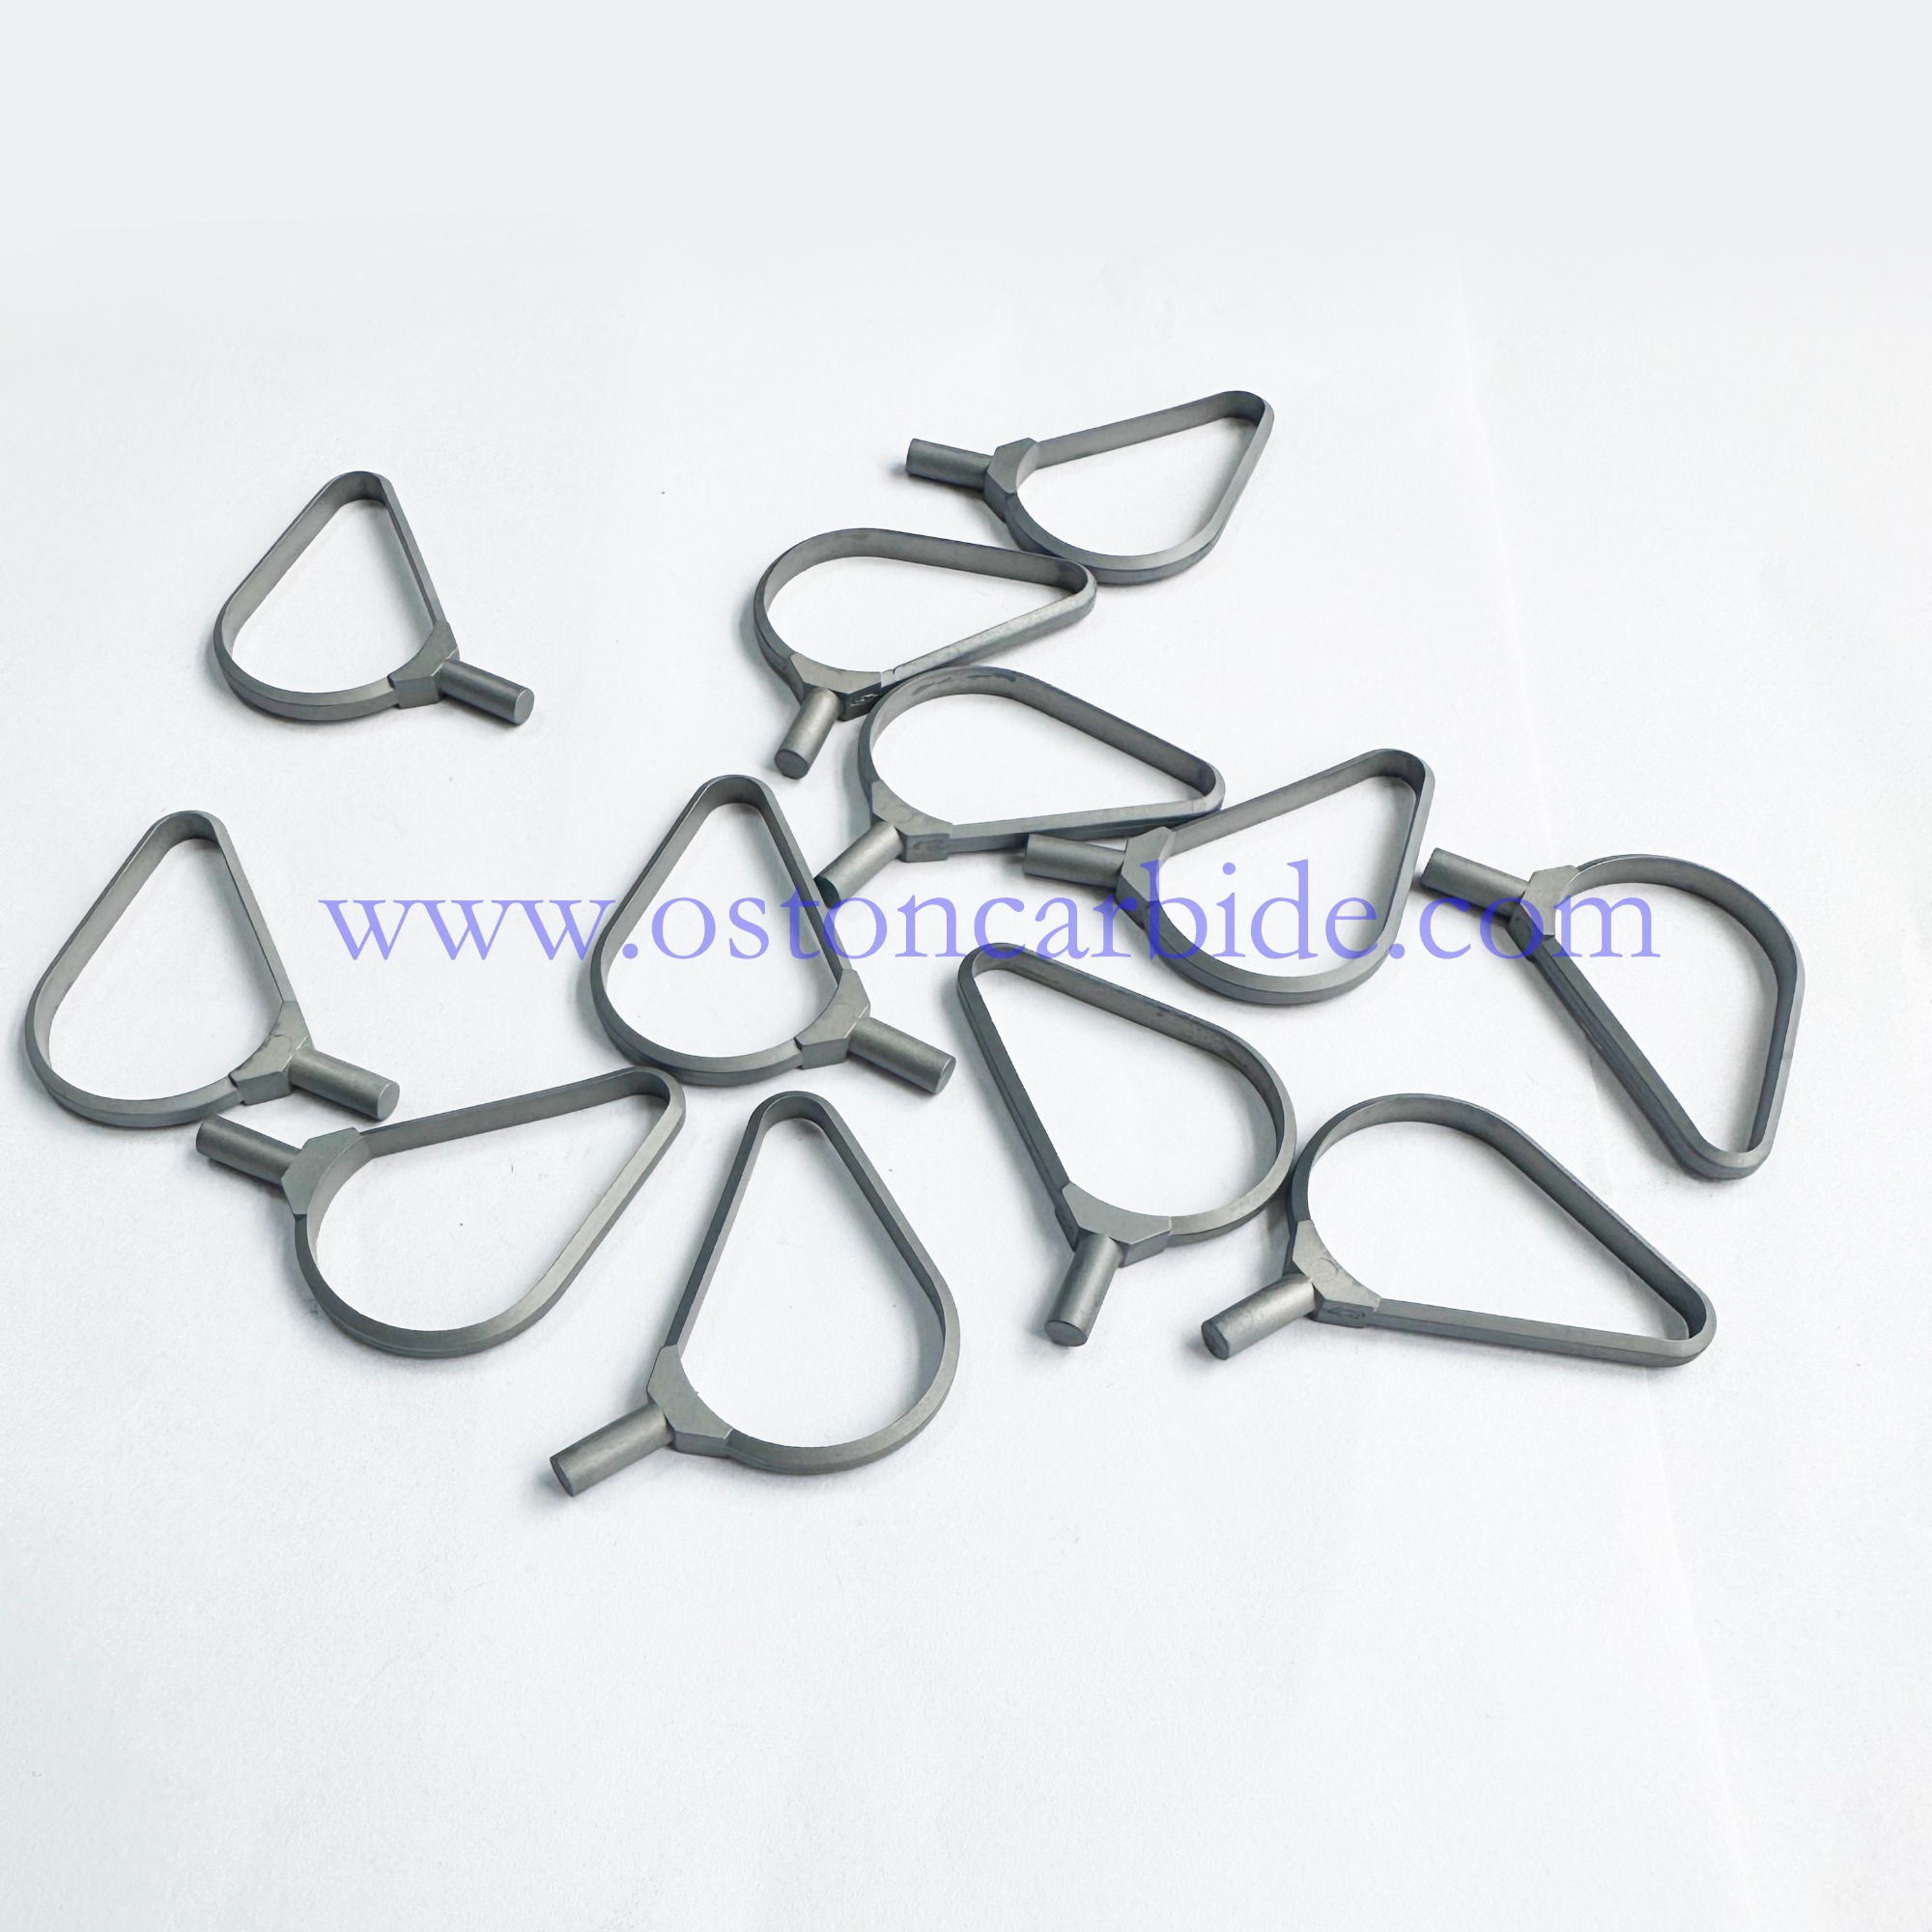 Tungsten Carbide Clay Scraping Loop Tool Sets for Tough Gritty Clay Trimming